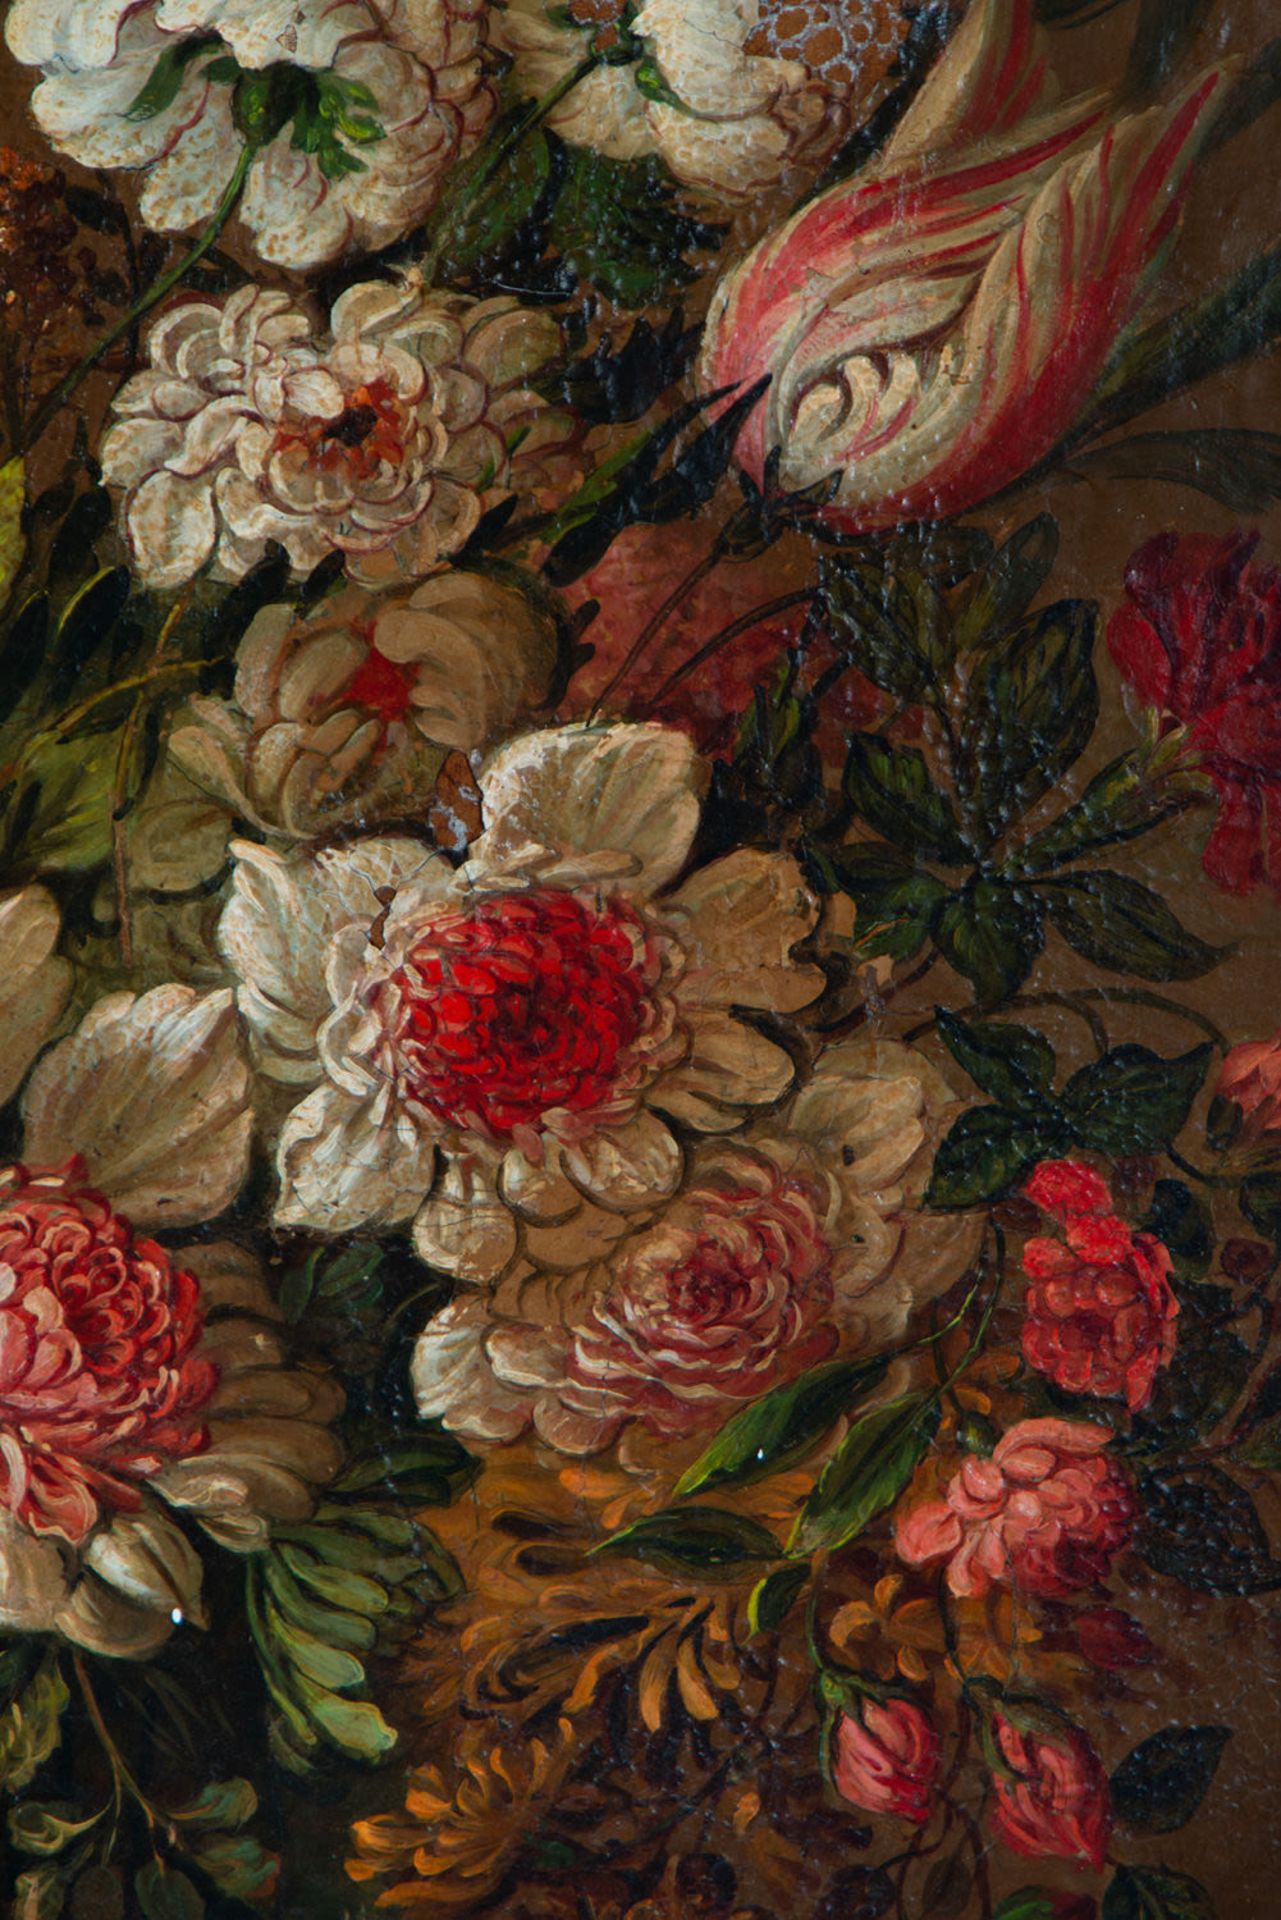 Pair of large still lifes of Flowers, Dutch school of the 17th - 18th century - Image 18 of 20